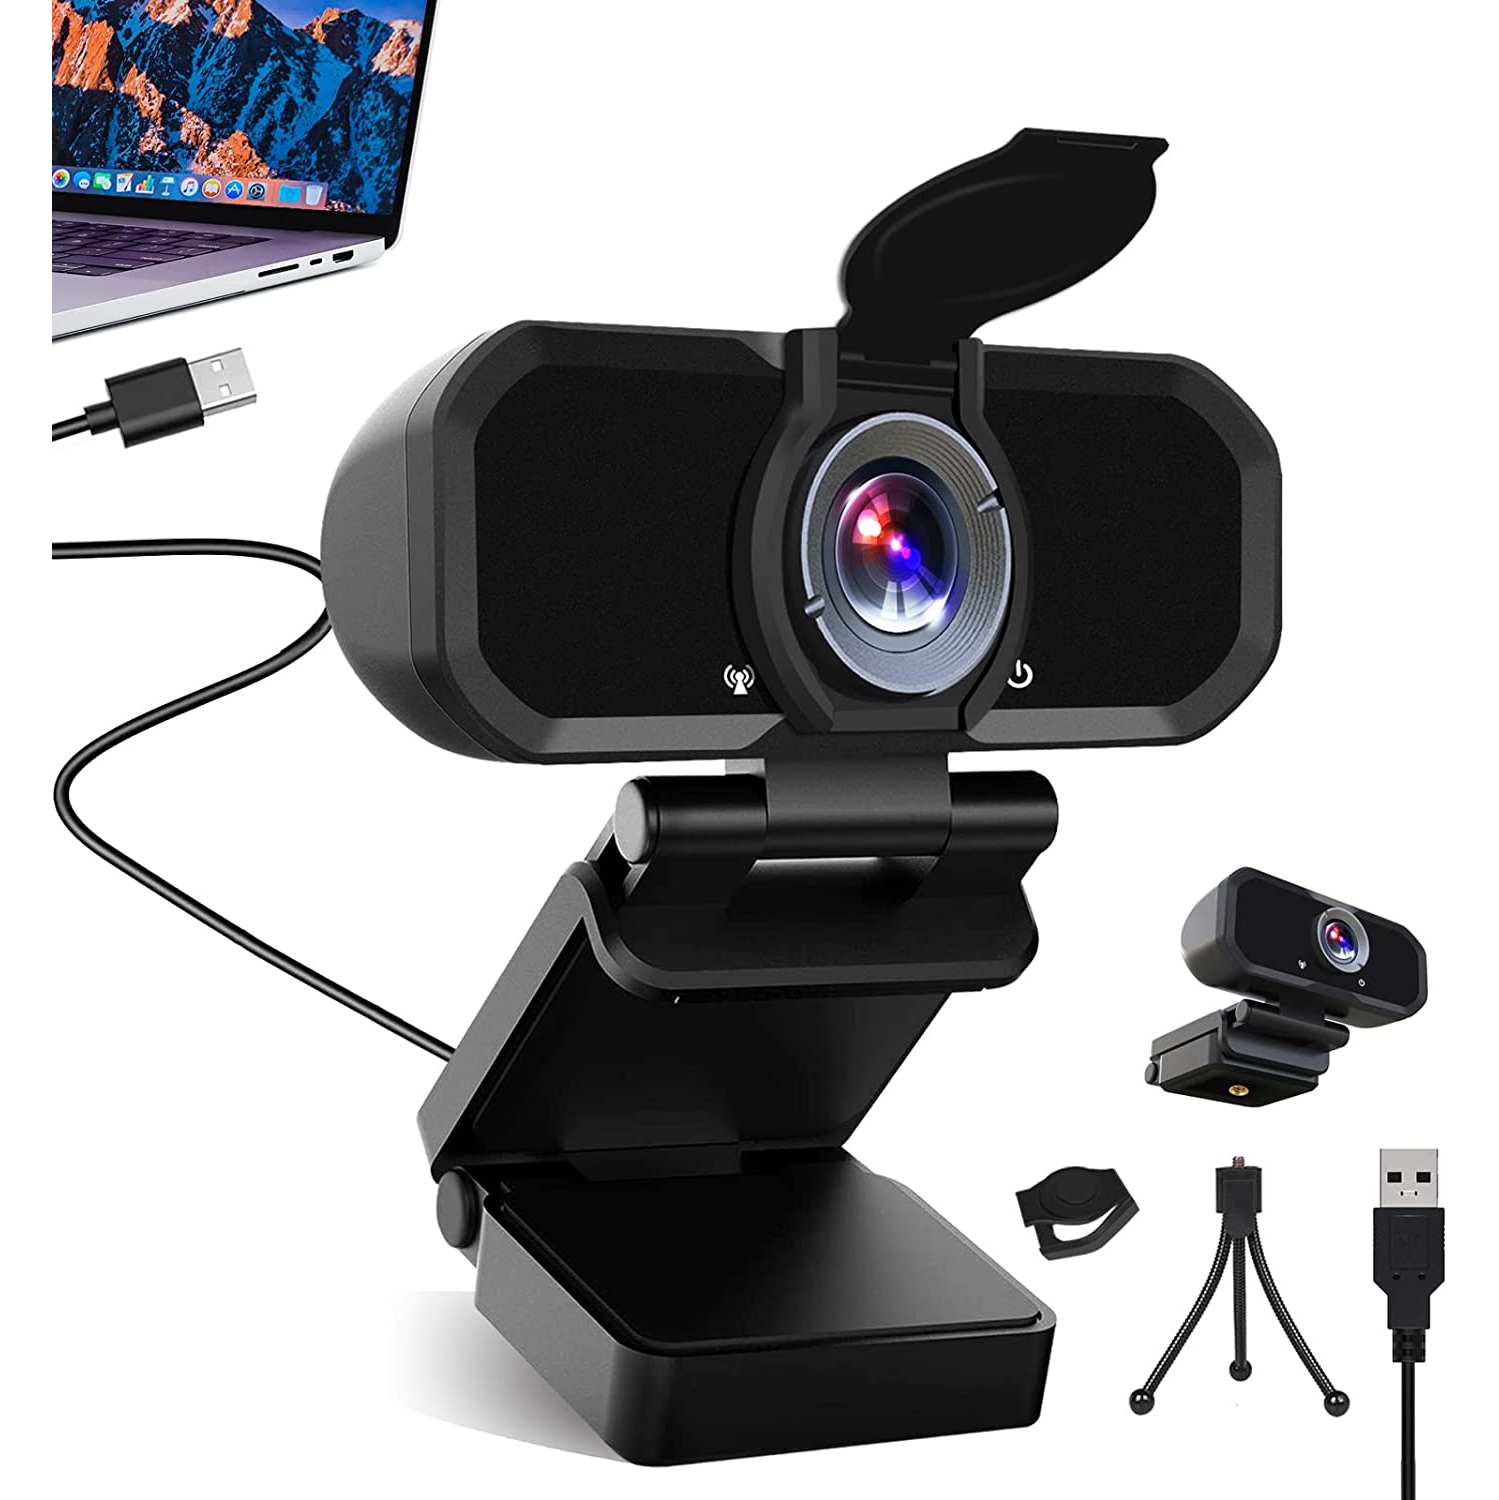 1080p Wecam with Microphone & Privacy Cover, 110 Degree Wide Angle Web Camera for PC Laptop Computer MAC Desktop, Plug and Play, HD USB Webcam for Zoom Video Conference Skype